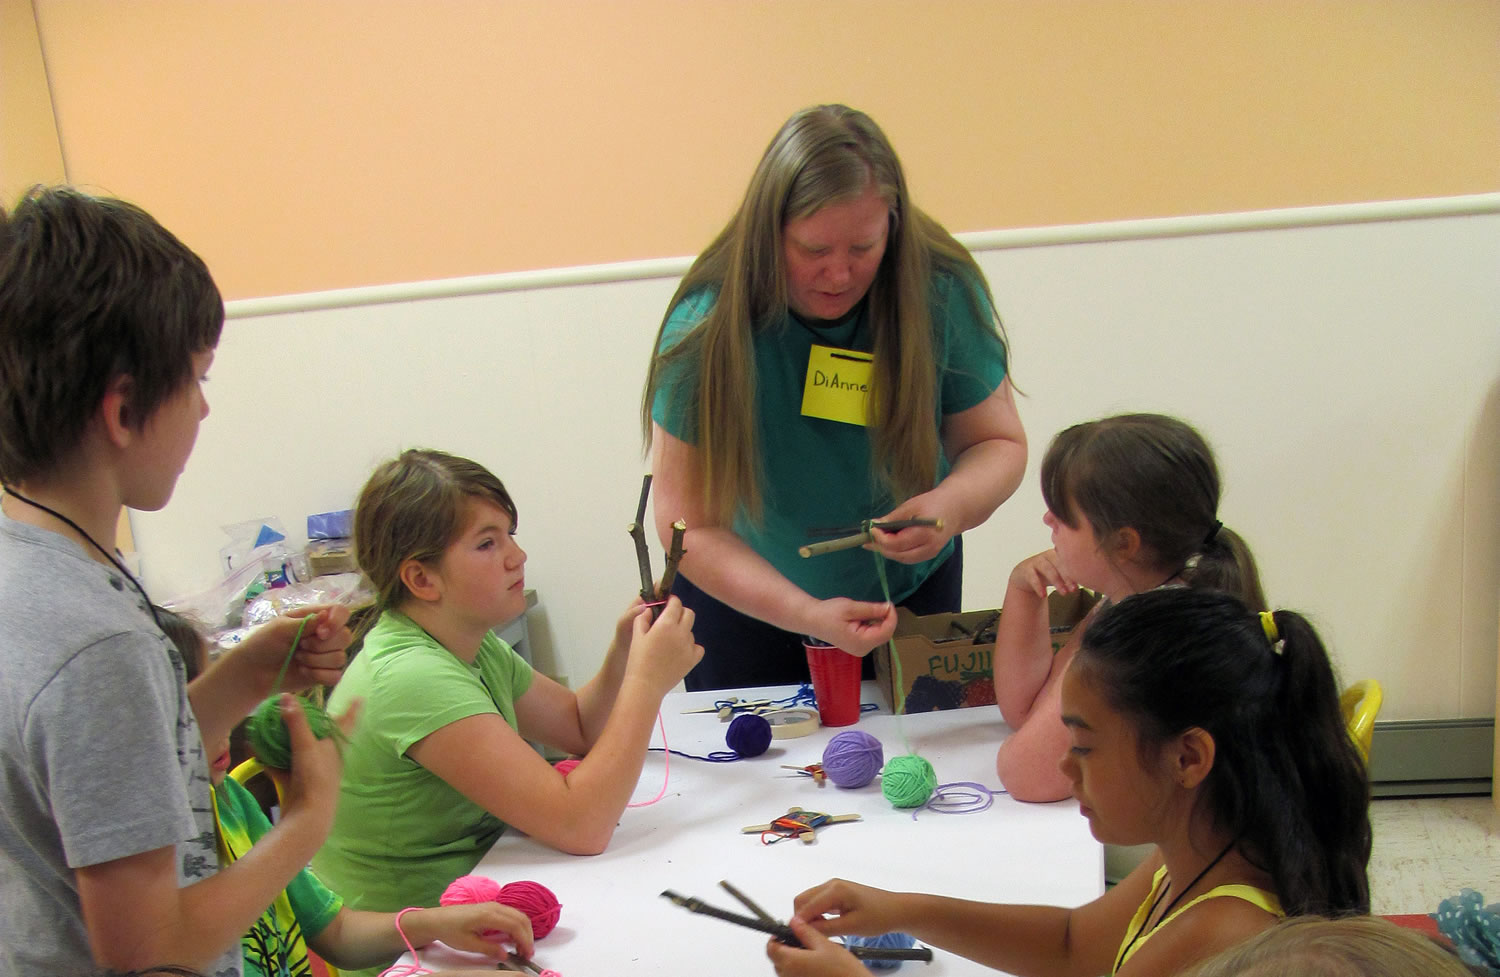 Vacation Bible School at Camas United Methodist Church focused on getting to know neighbors near and far.